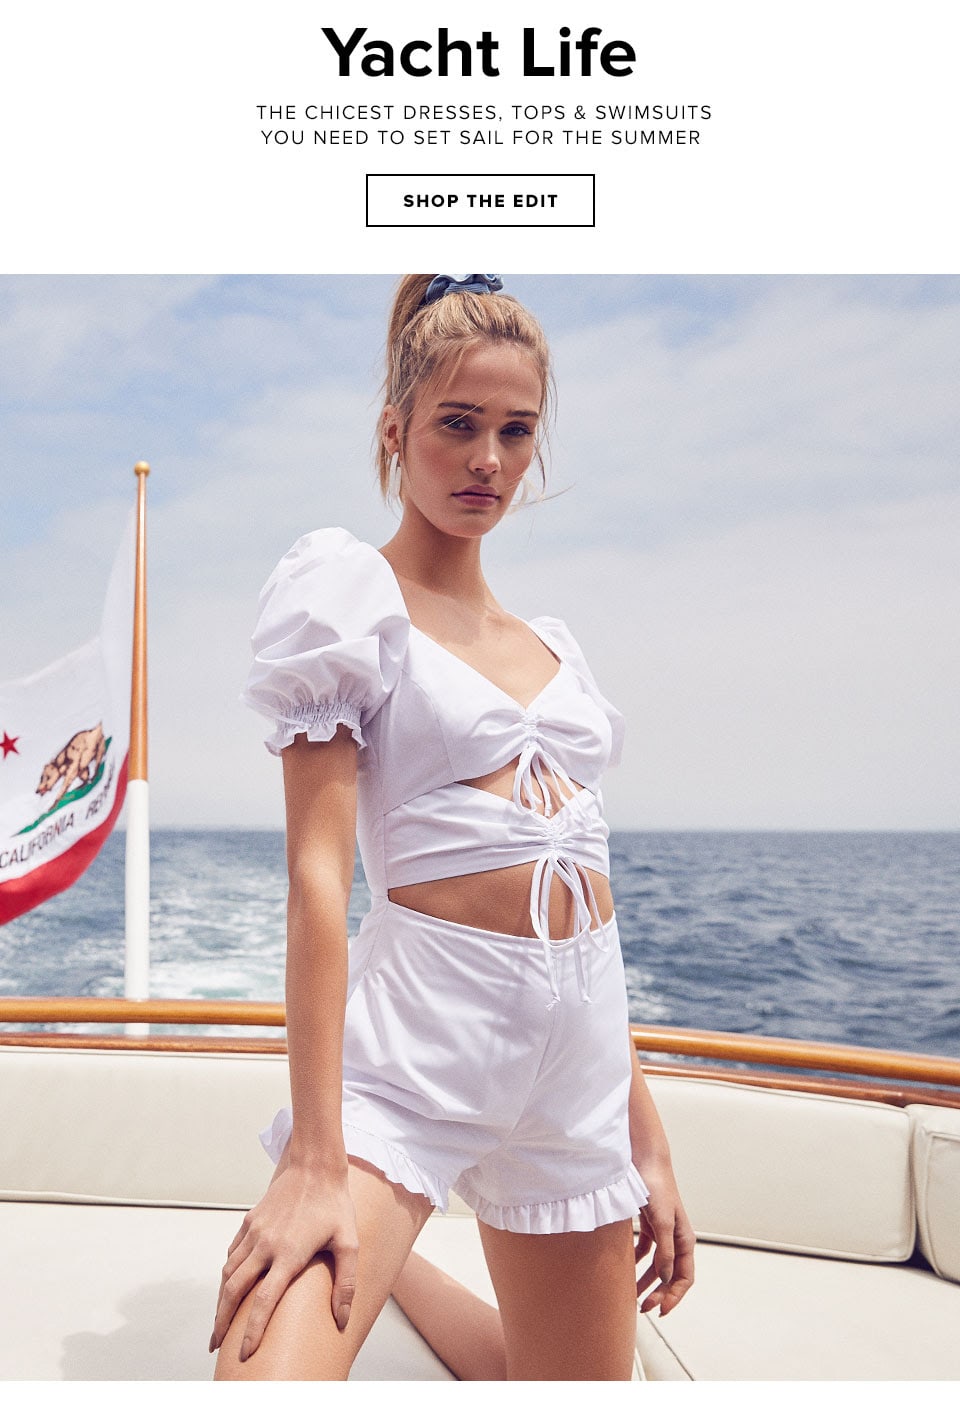 Yacht Life. The chicest dresses, tops &amp; swimsuits you need to set sail for the summer. Shop The Edit.